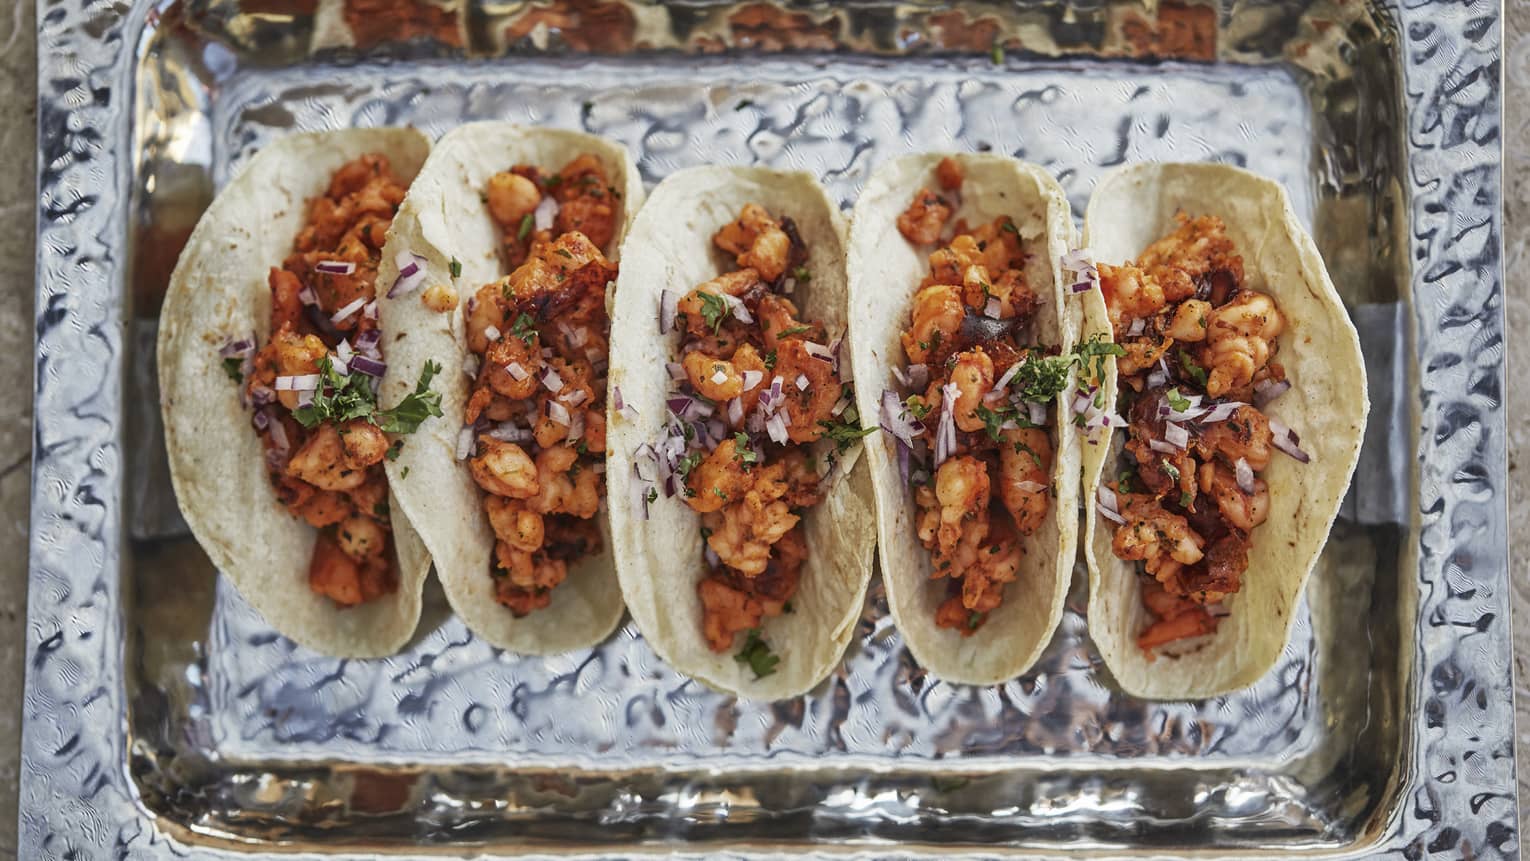 Aerial view of row of five tacos in dish